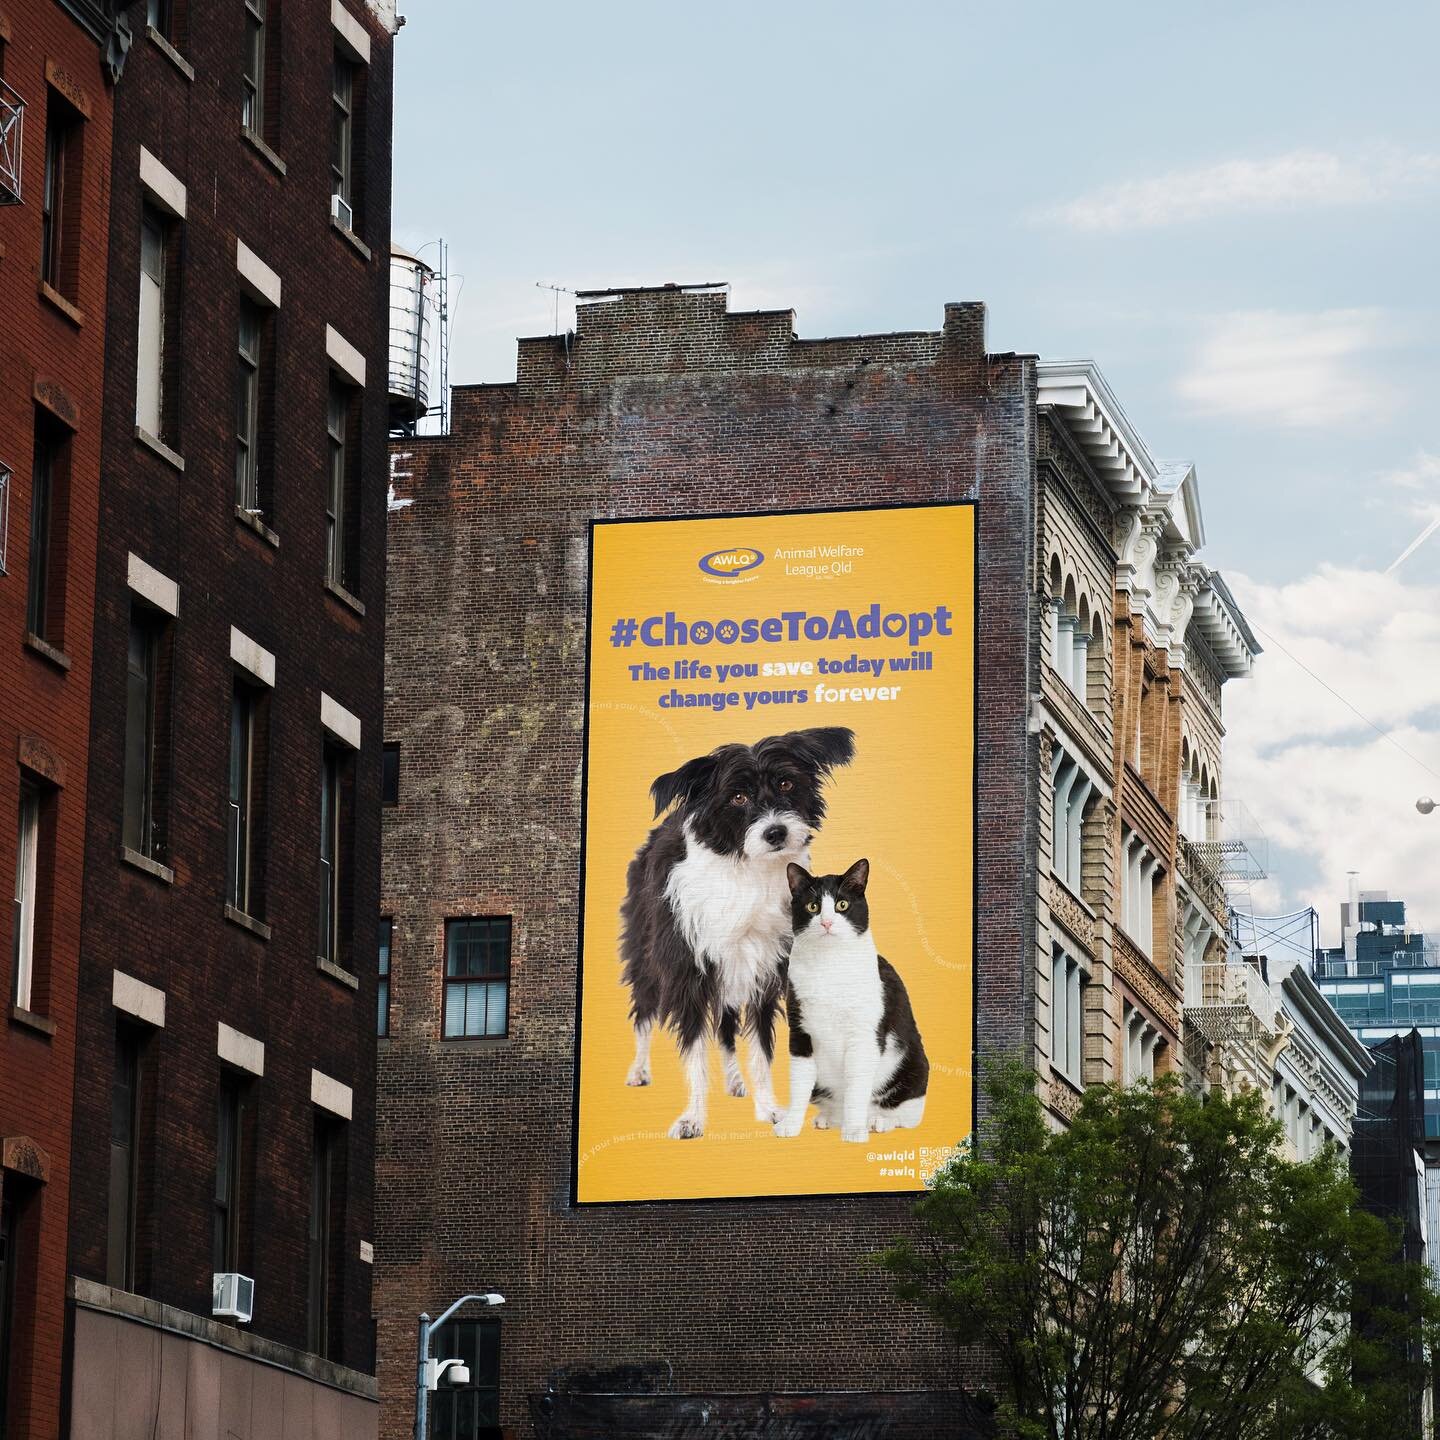 #ChooseToAdopt ❤️ 🐶 🐱 
Our latest campaign for @awlqld 
Keep an eye out, currently live around Gold Coast, SEQ region. #awlq